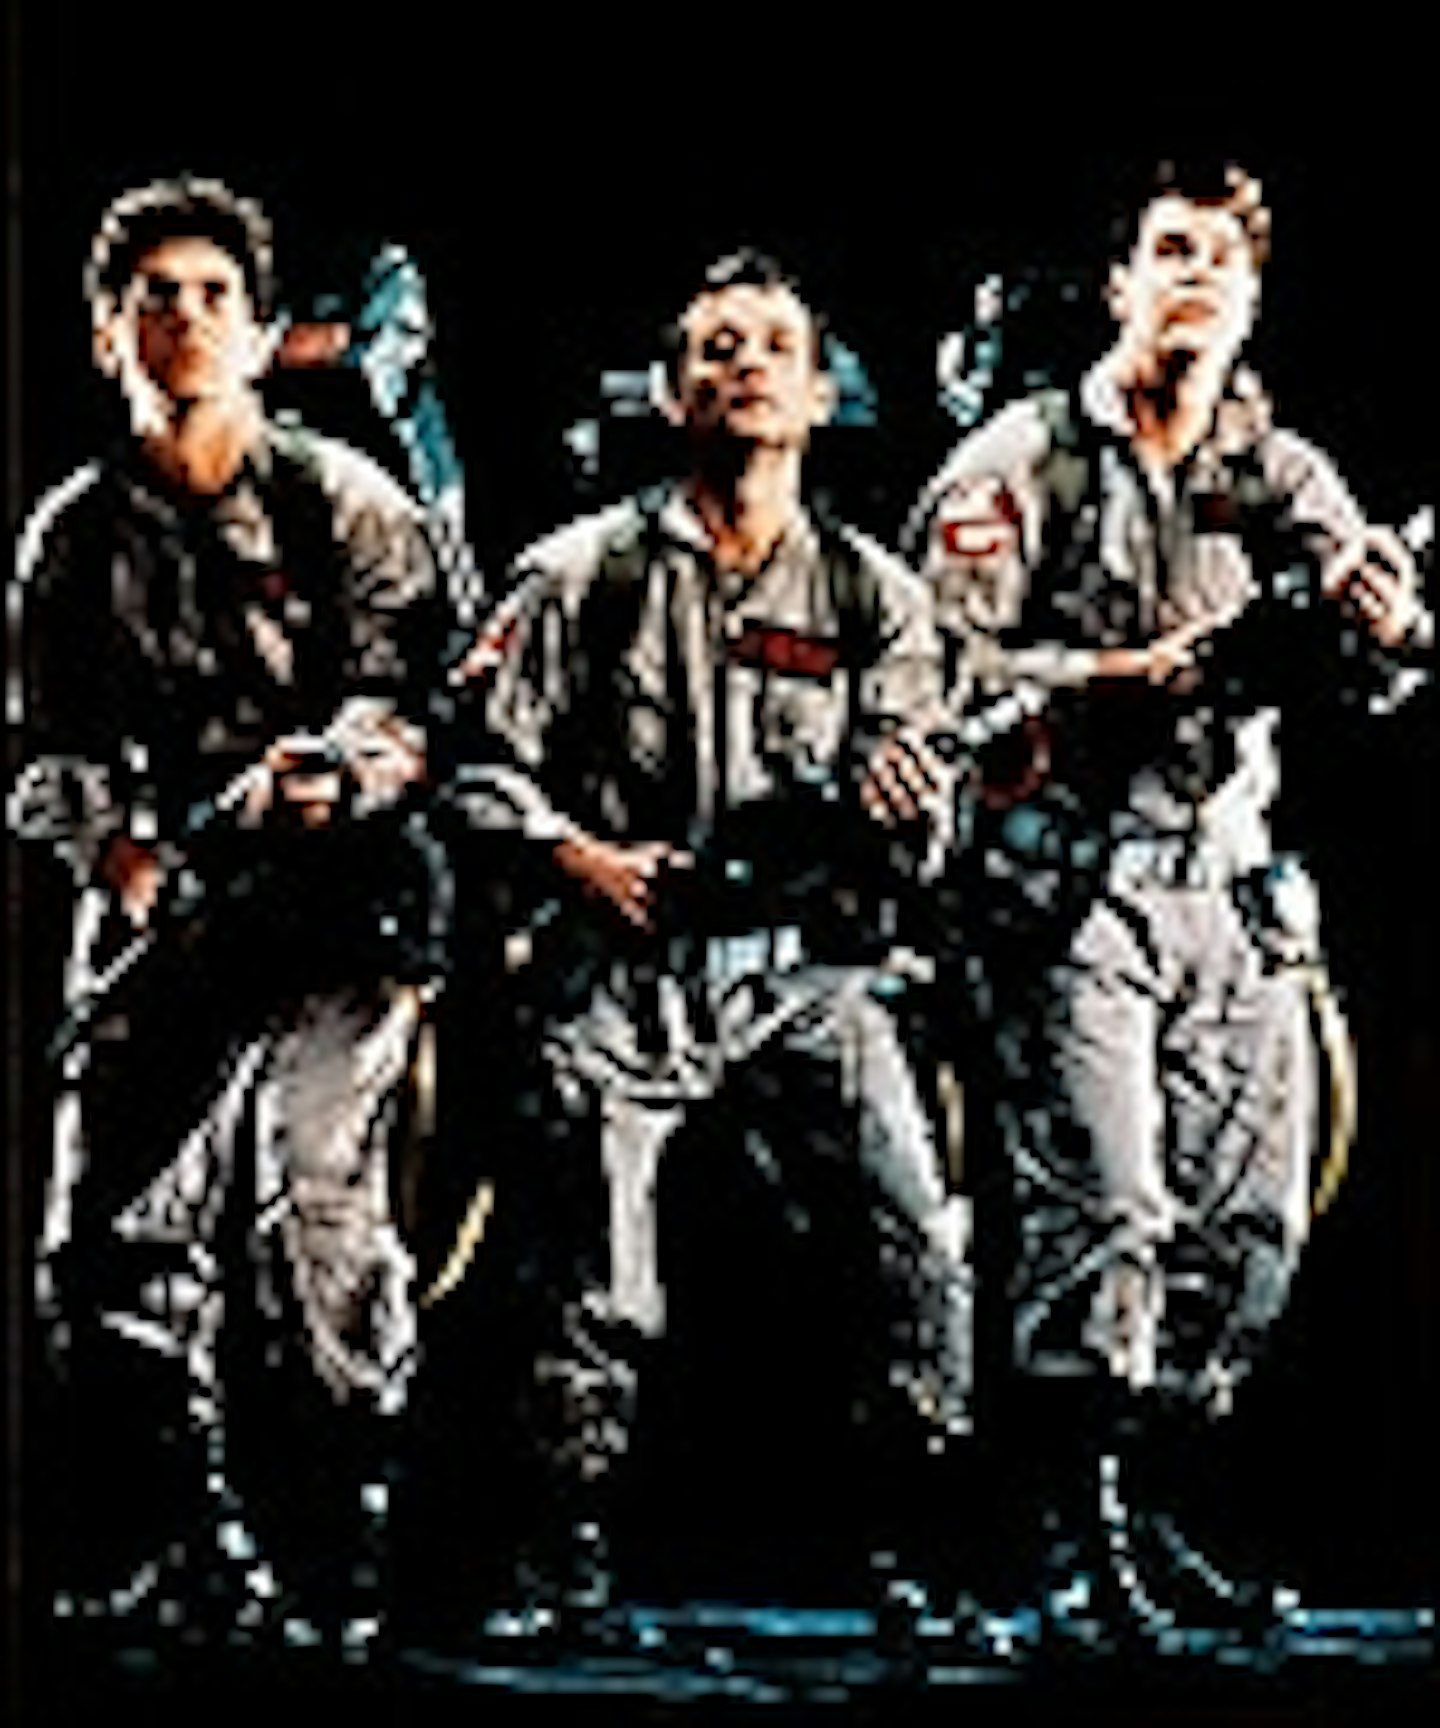 Ghostbusters 3 Shooting Next Spring?